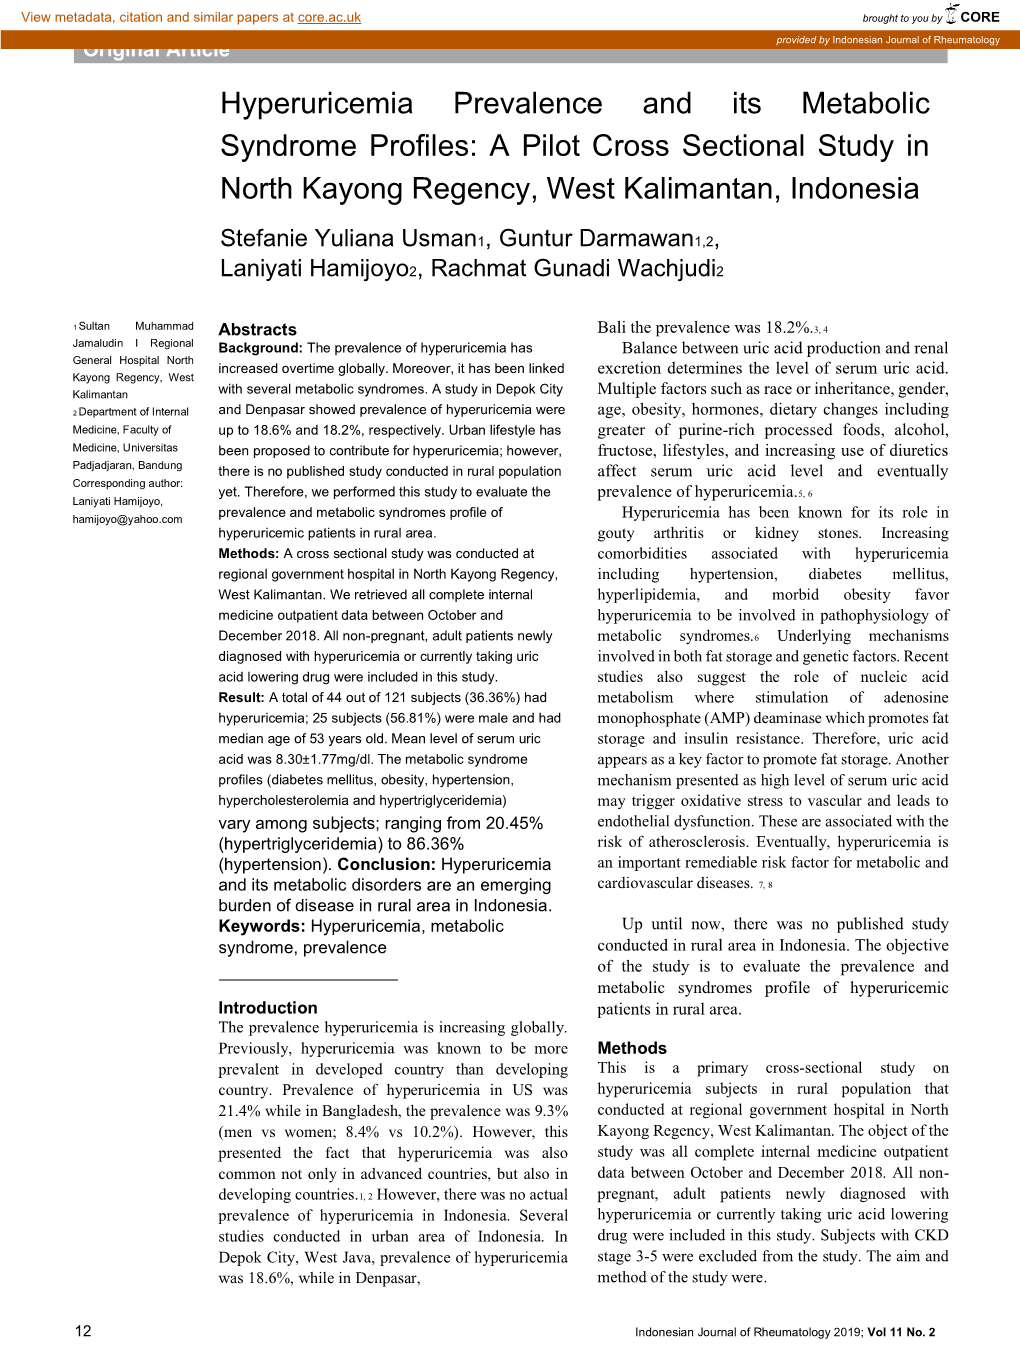 Hyperuricemia Prevalence and Its Metabolic Syndrome Profiles: a Pilot Cross Sectional Study in North Kayong Regency, West Kalimantan, Indonesia